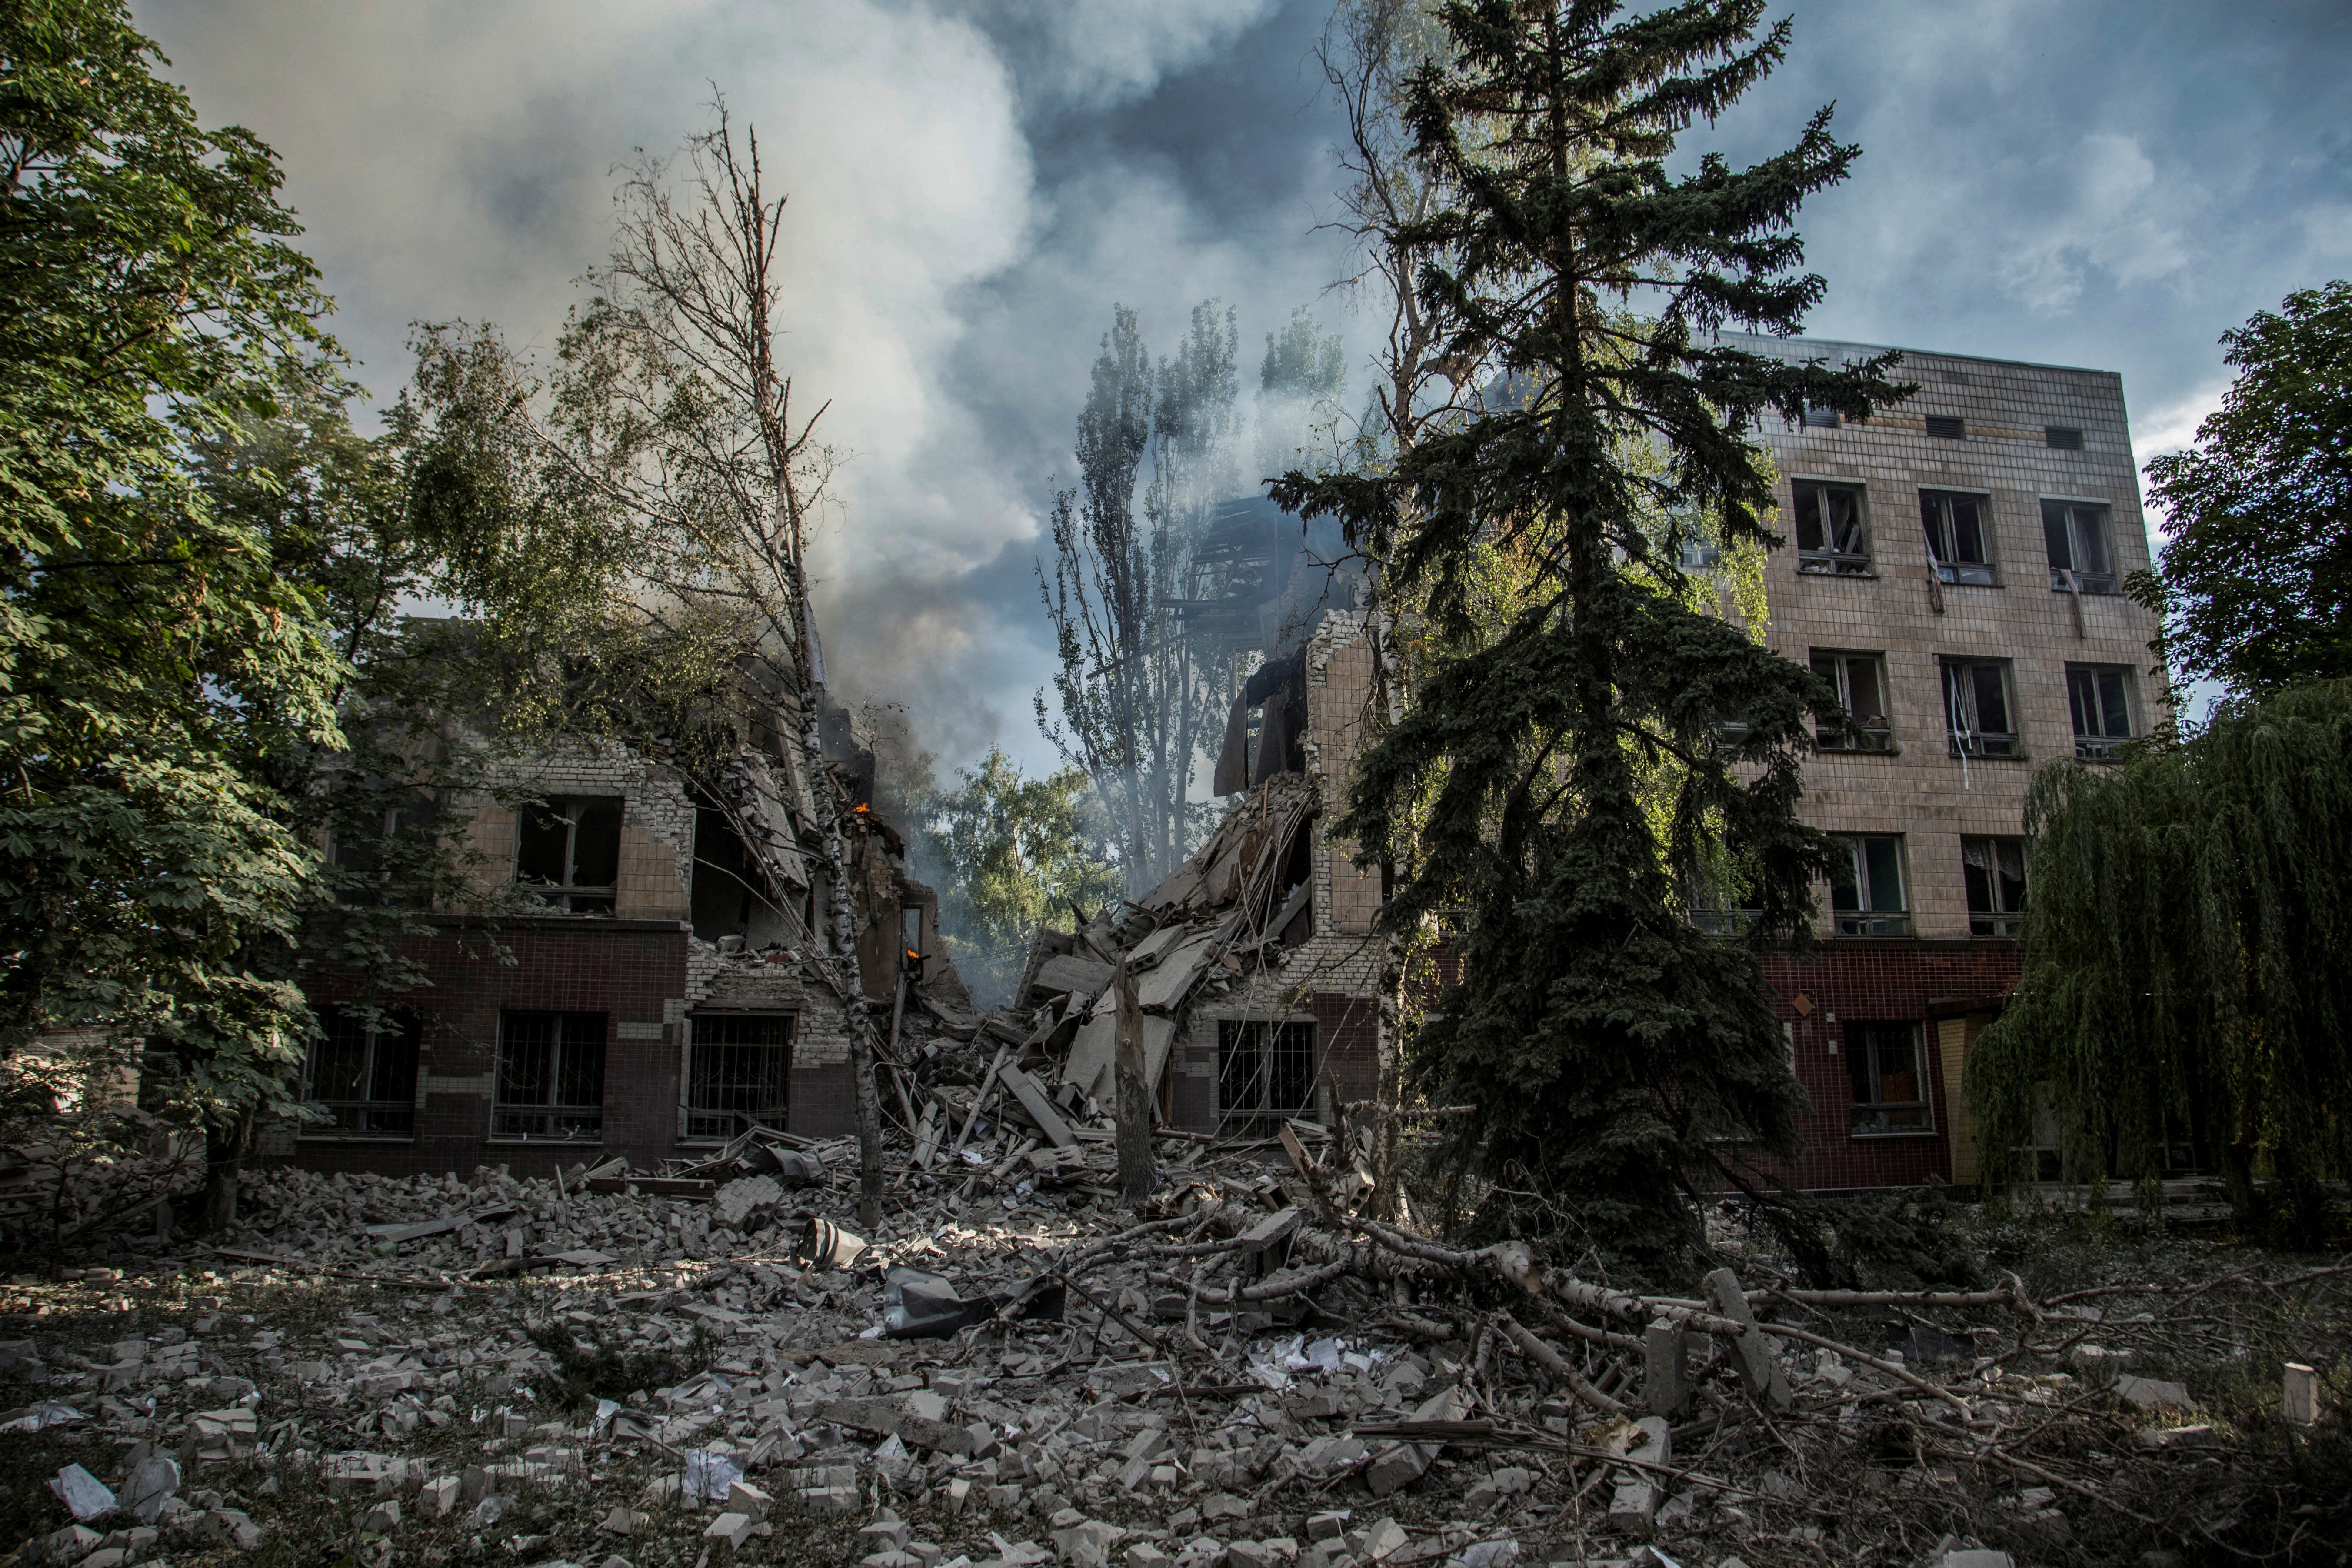 The remains of a building in Lysychansk, in the Luhansk region of Ukraine, after a Russian attack